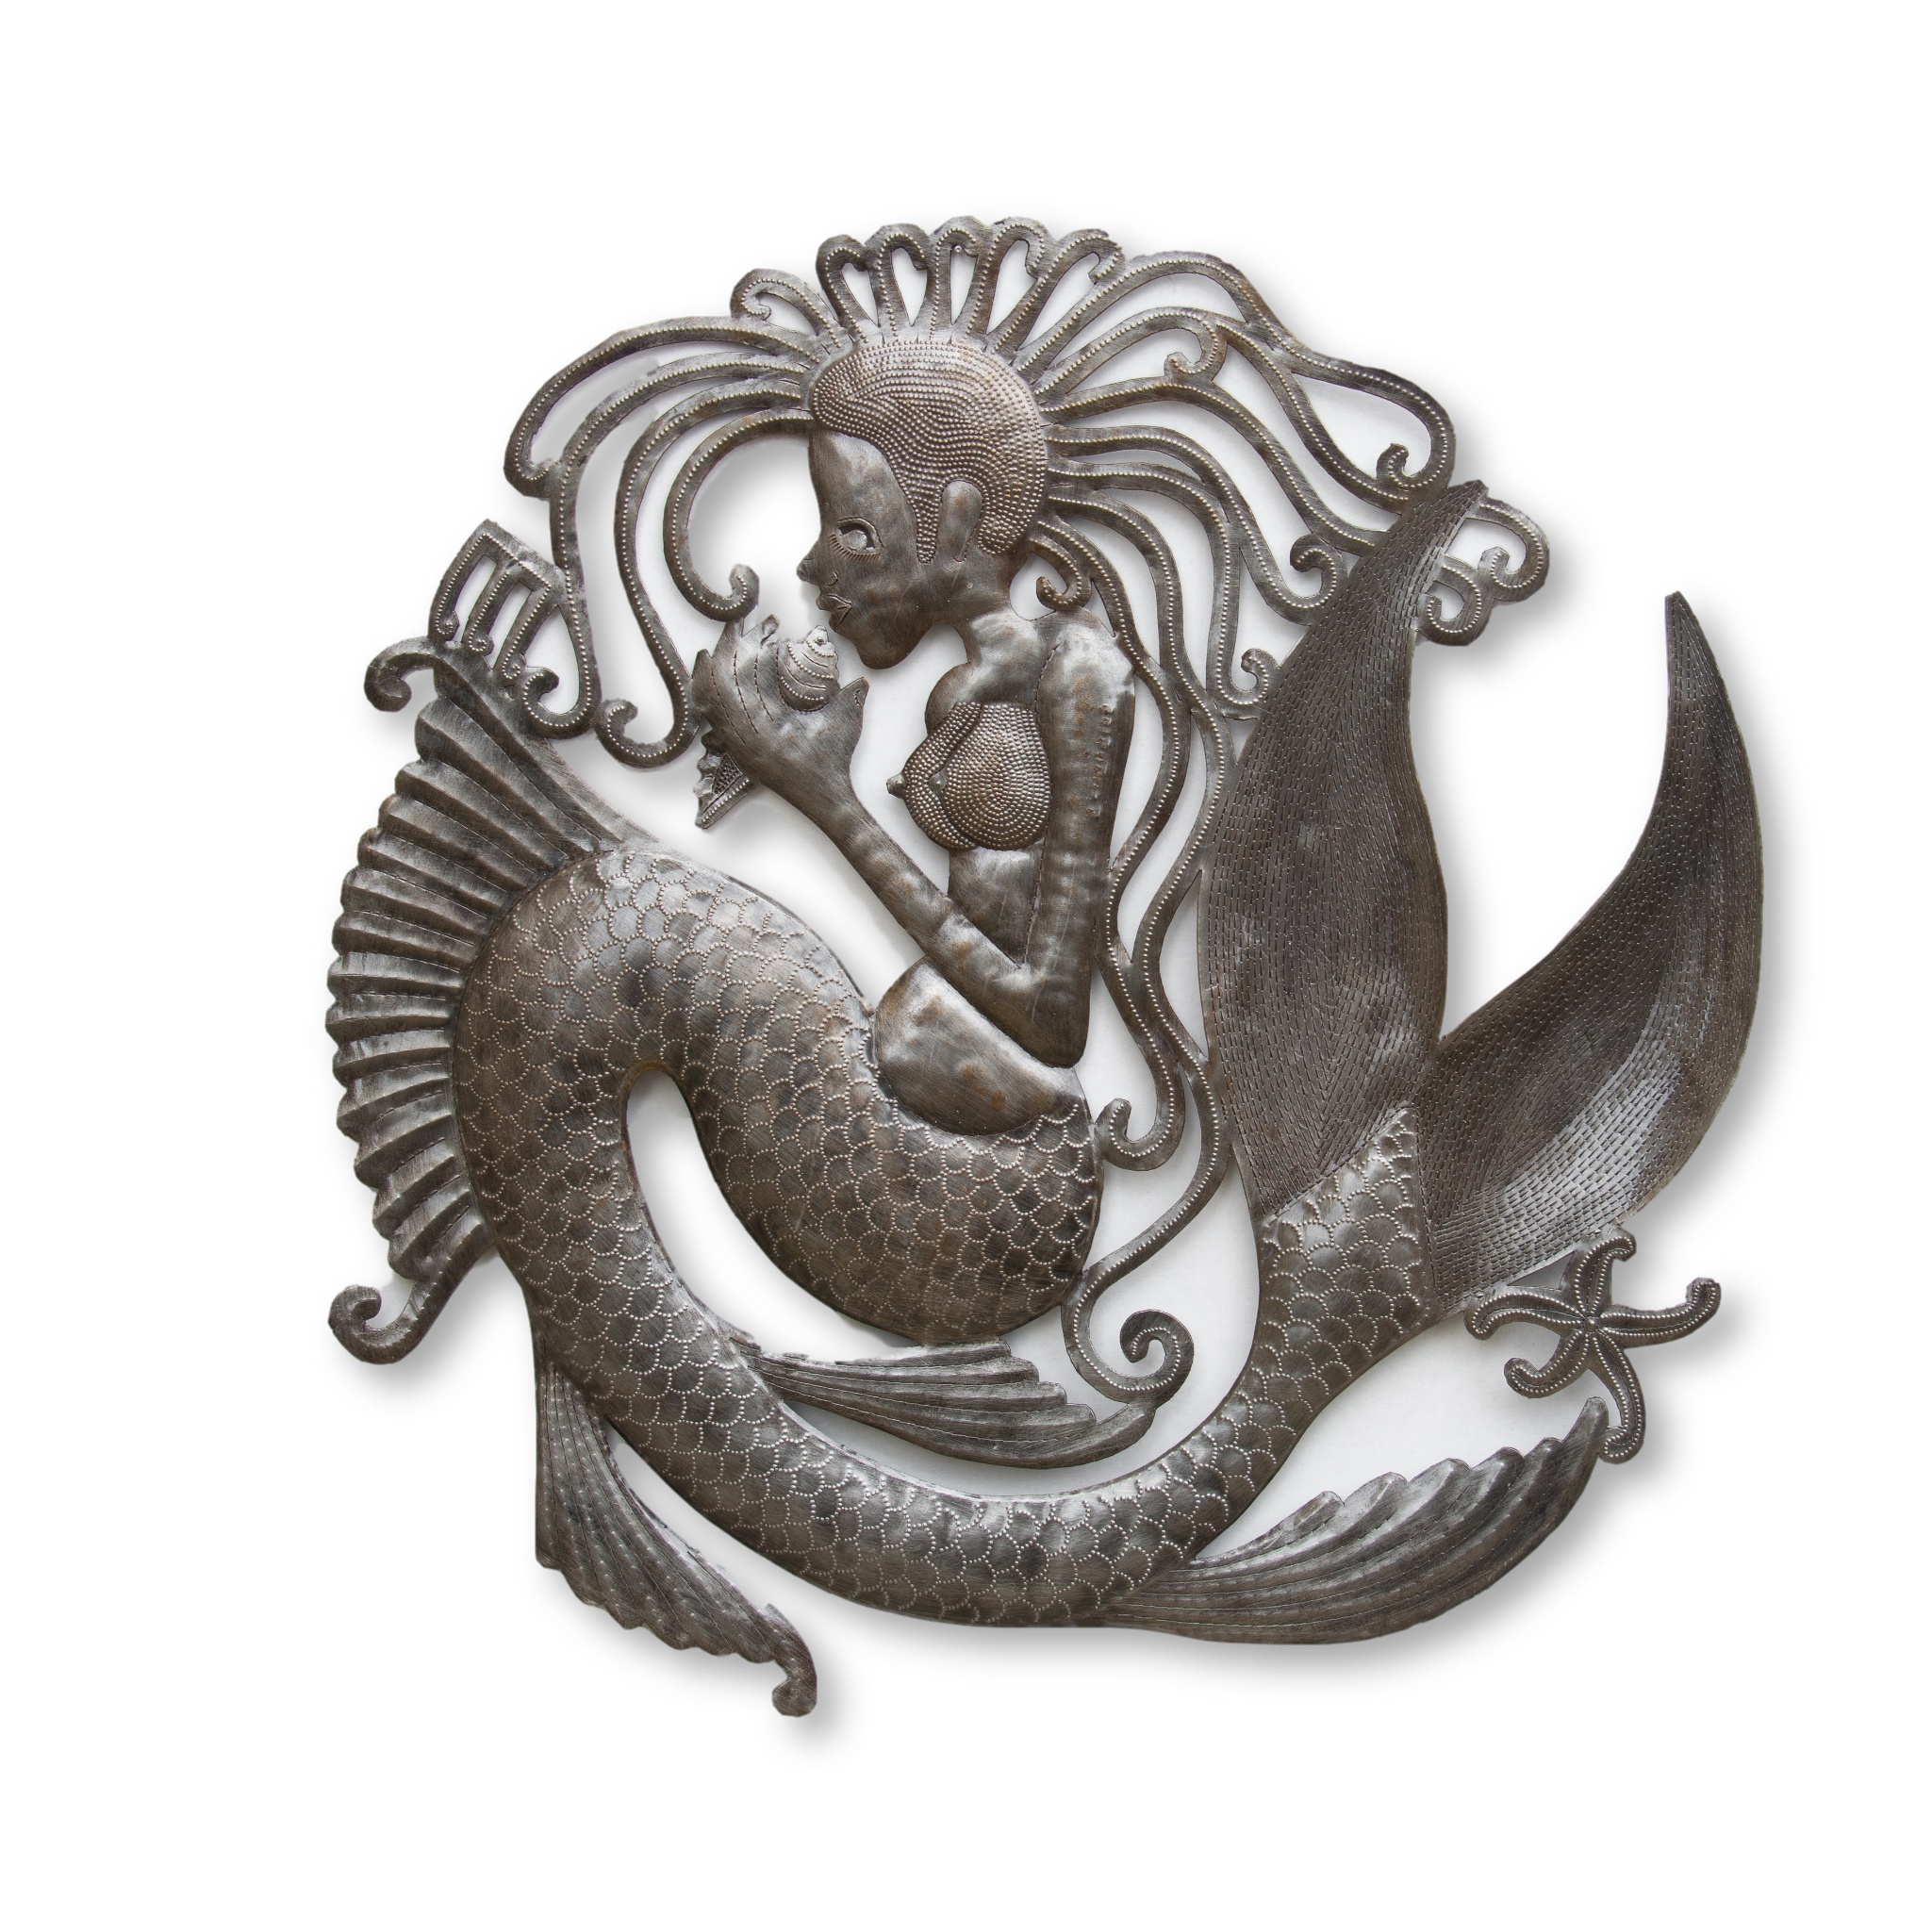 Mermaid Playing With Shell Nautical Metal Sculpture Limited Edition Art